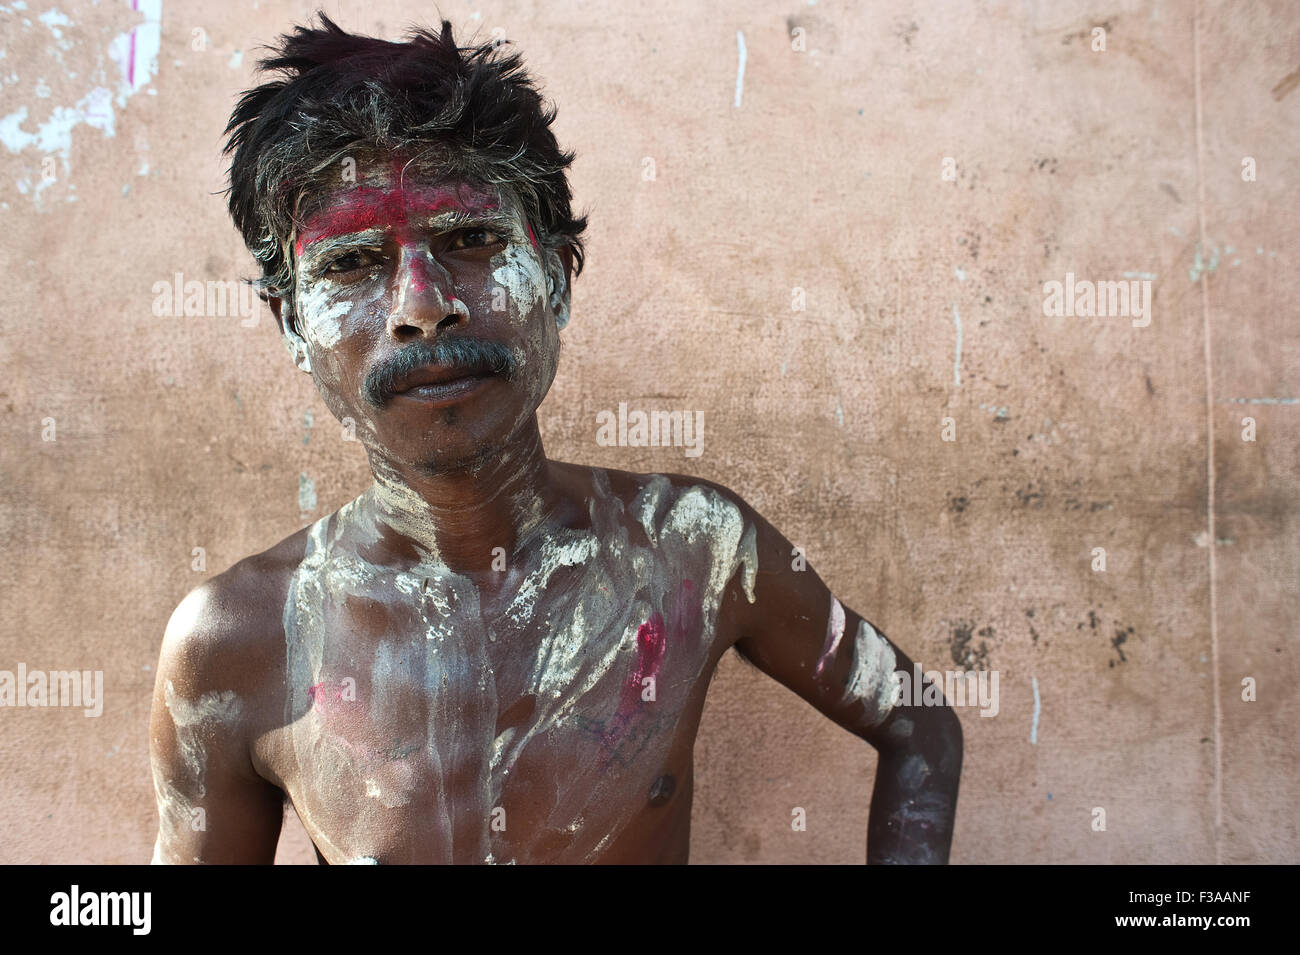 Man begging with the face and body painted red and white ( India) Stock Photo